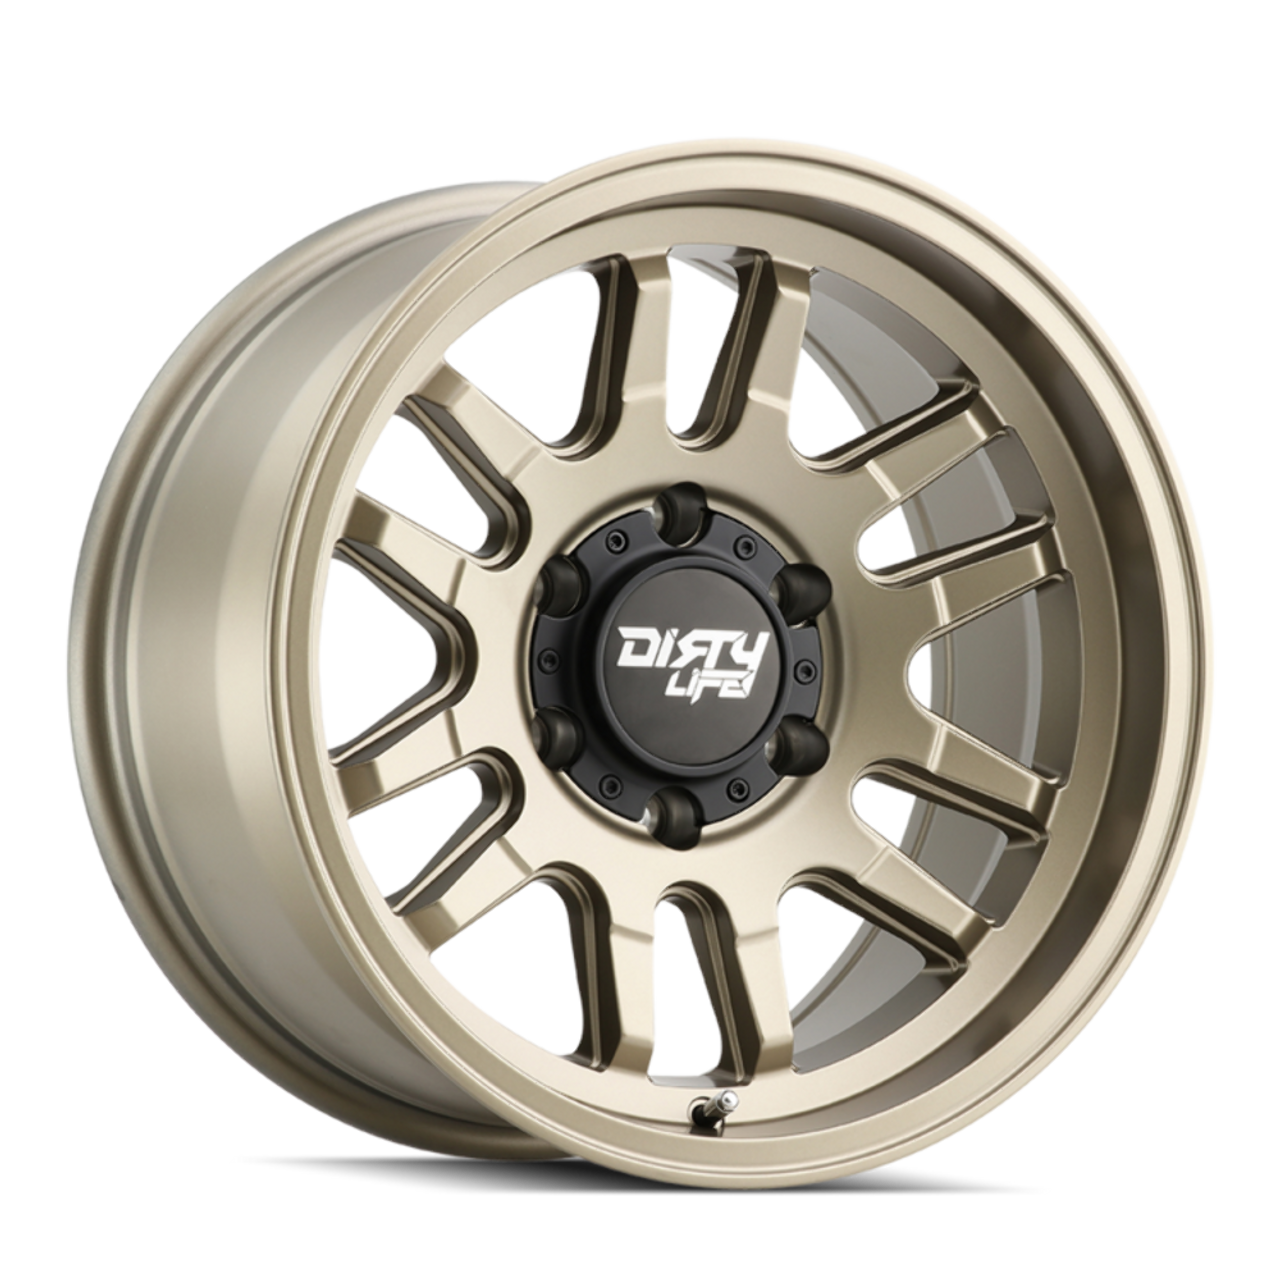 17" Dirty Life Canyon 17x9 Satin Gold 6x135 Wheel 0mm For Ford Lincoln Truck Rim